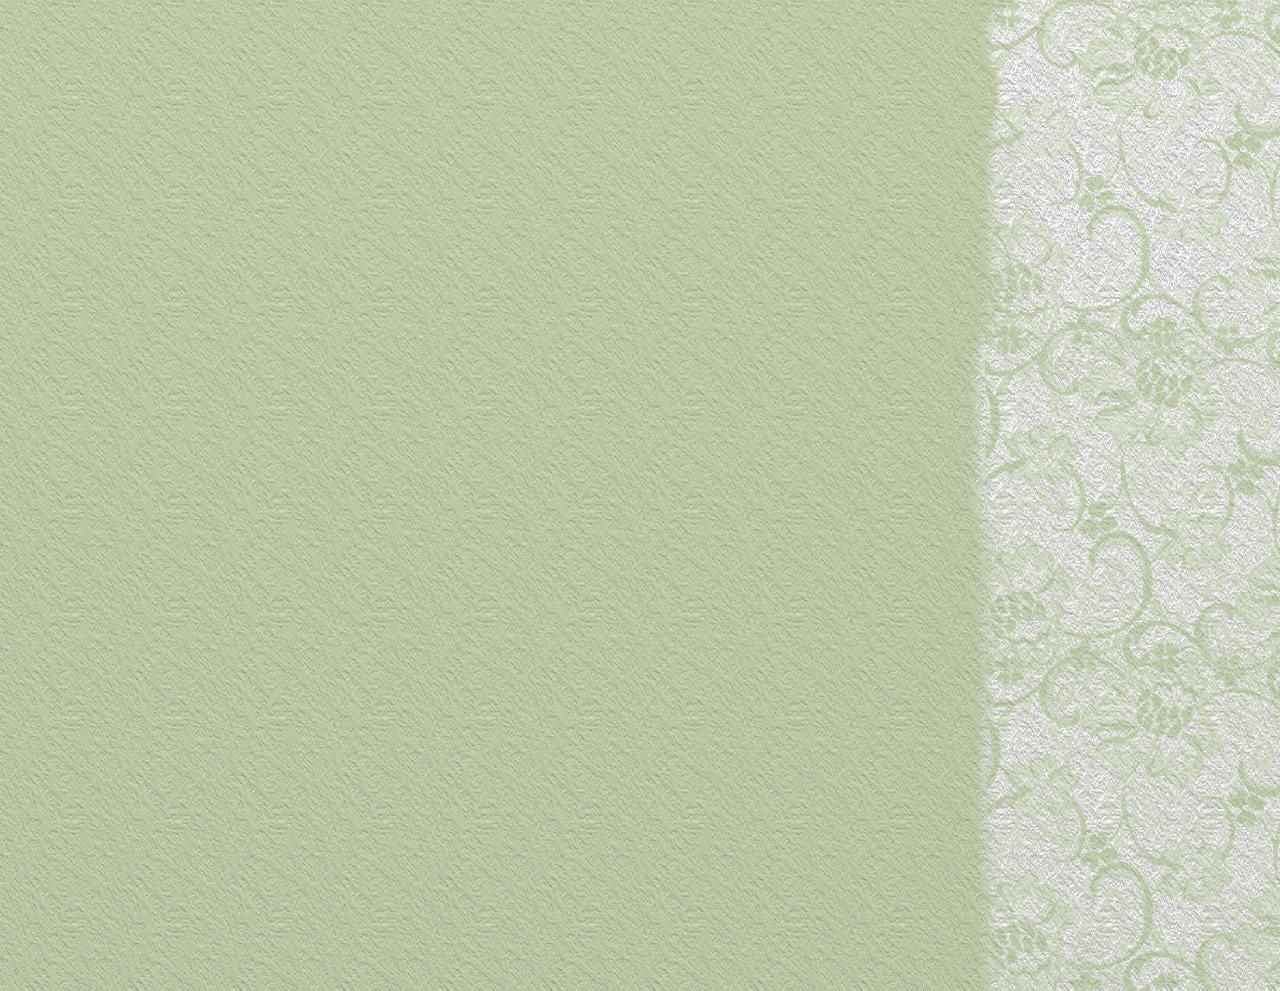 A green background with a white patterned border - Sage green